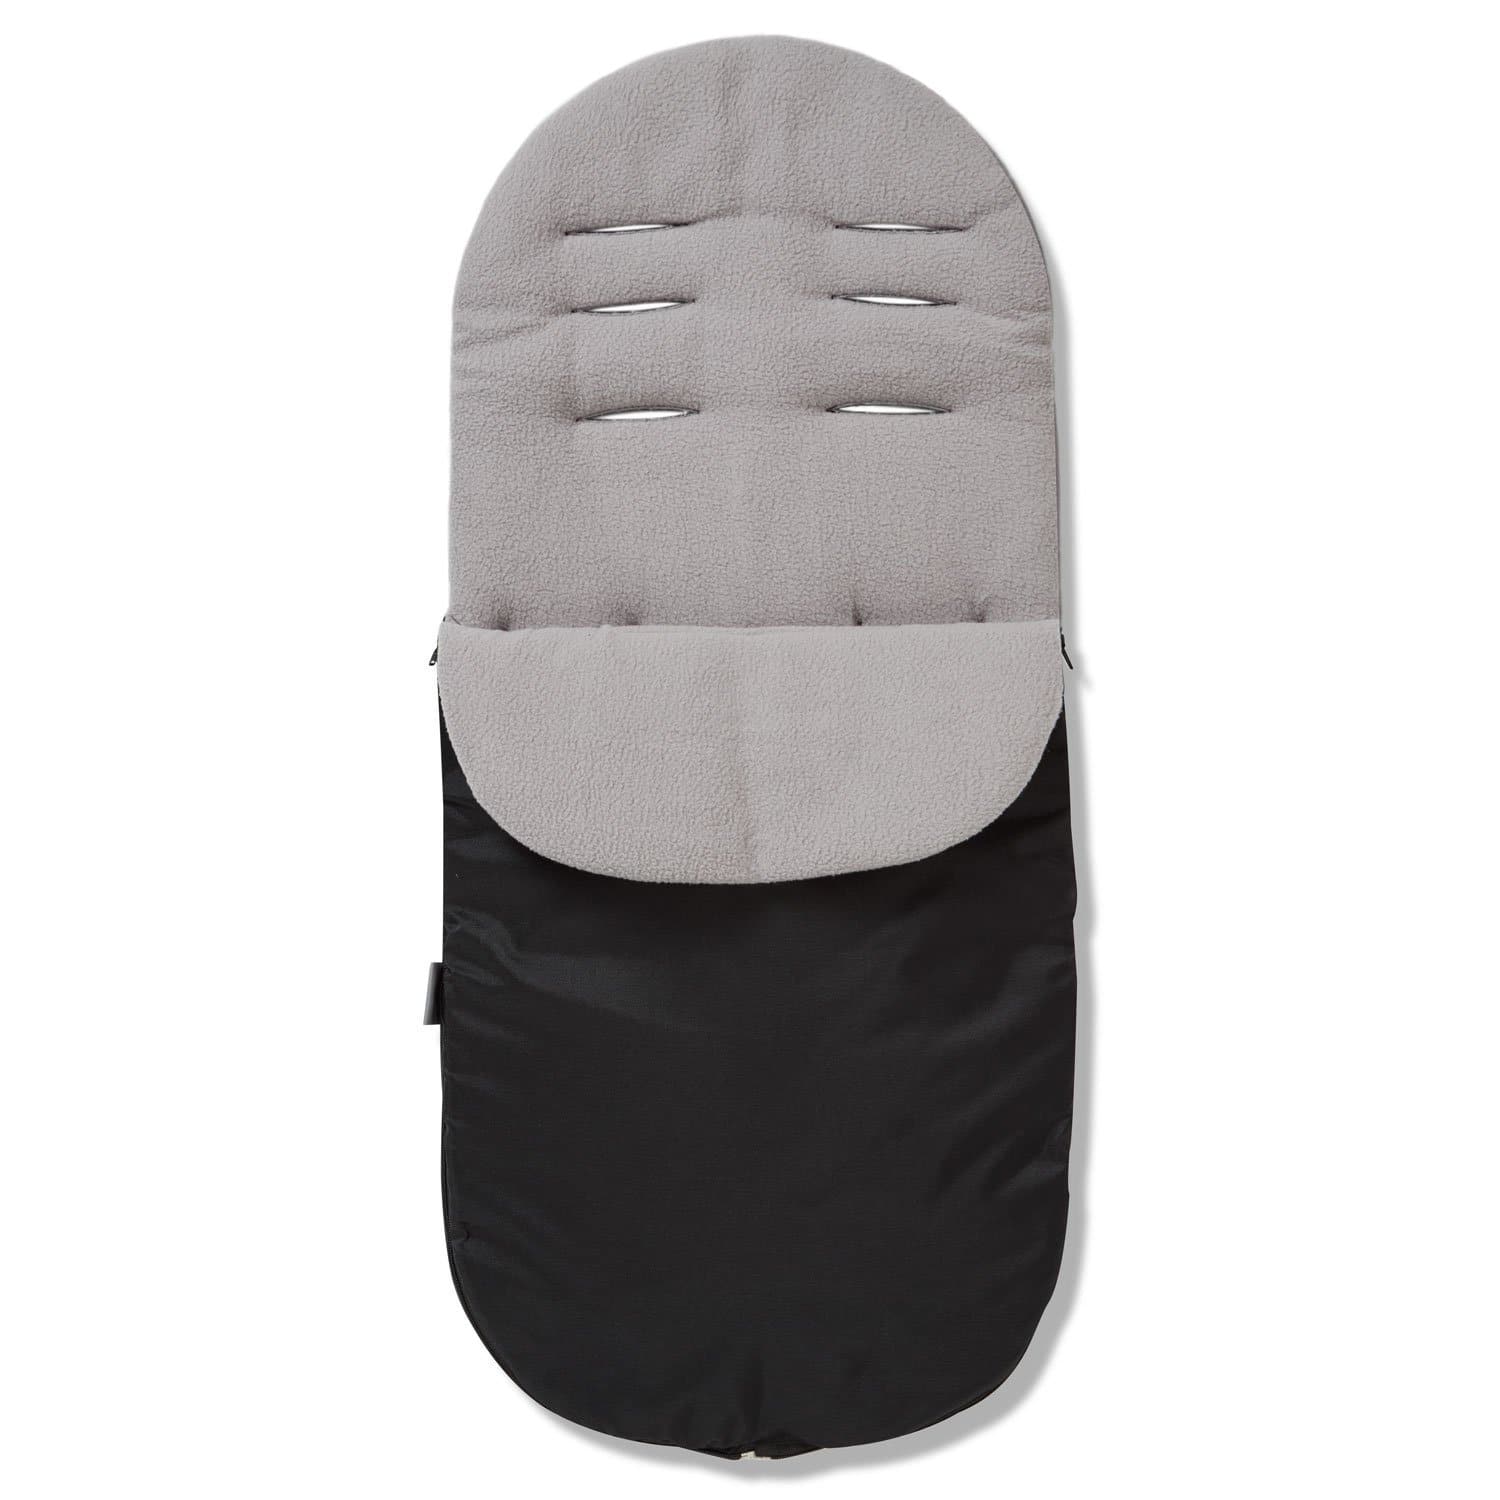 Footmuff / Cosy Toes Compatible with Mee-Go - Grey / Fits All Models | For Your Little One